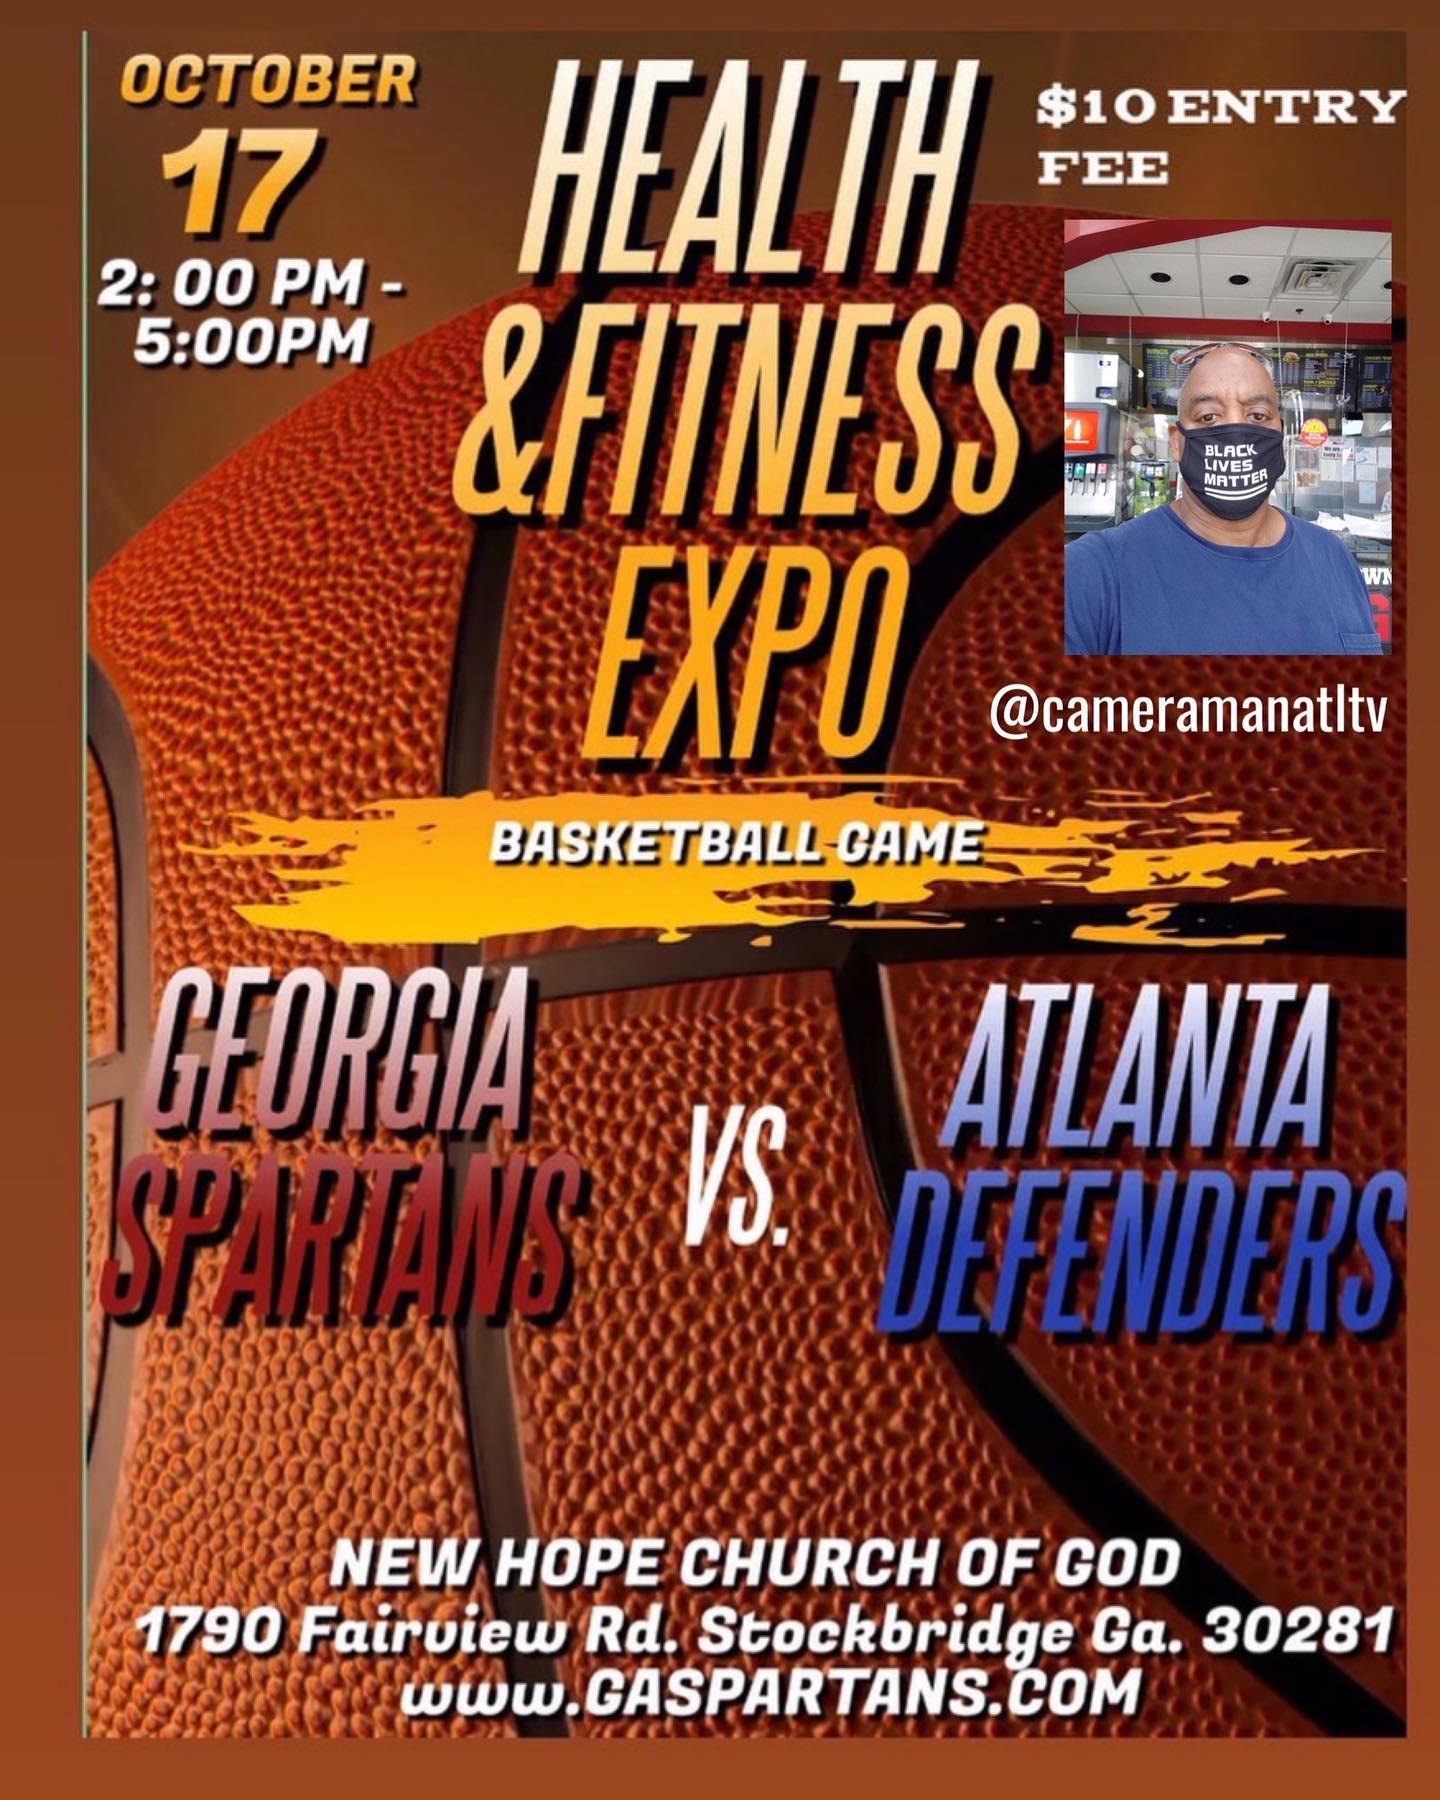 @cameramanatltv will be honored on Oct. 17 2pm to 5pm Health&Fitness Expo Basketball Game. New Hope Church of God 1790 Fairview